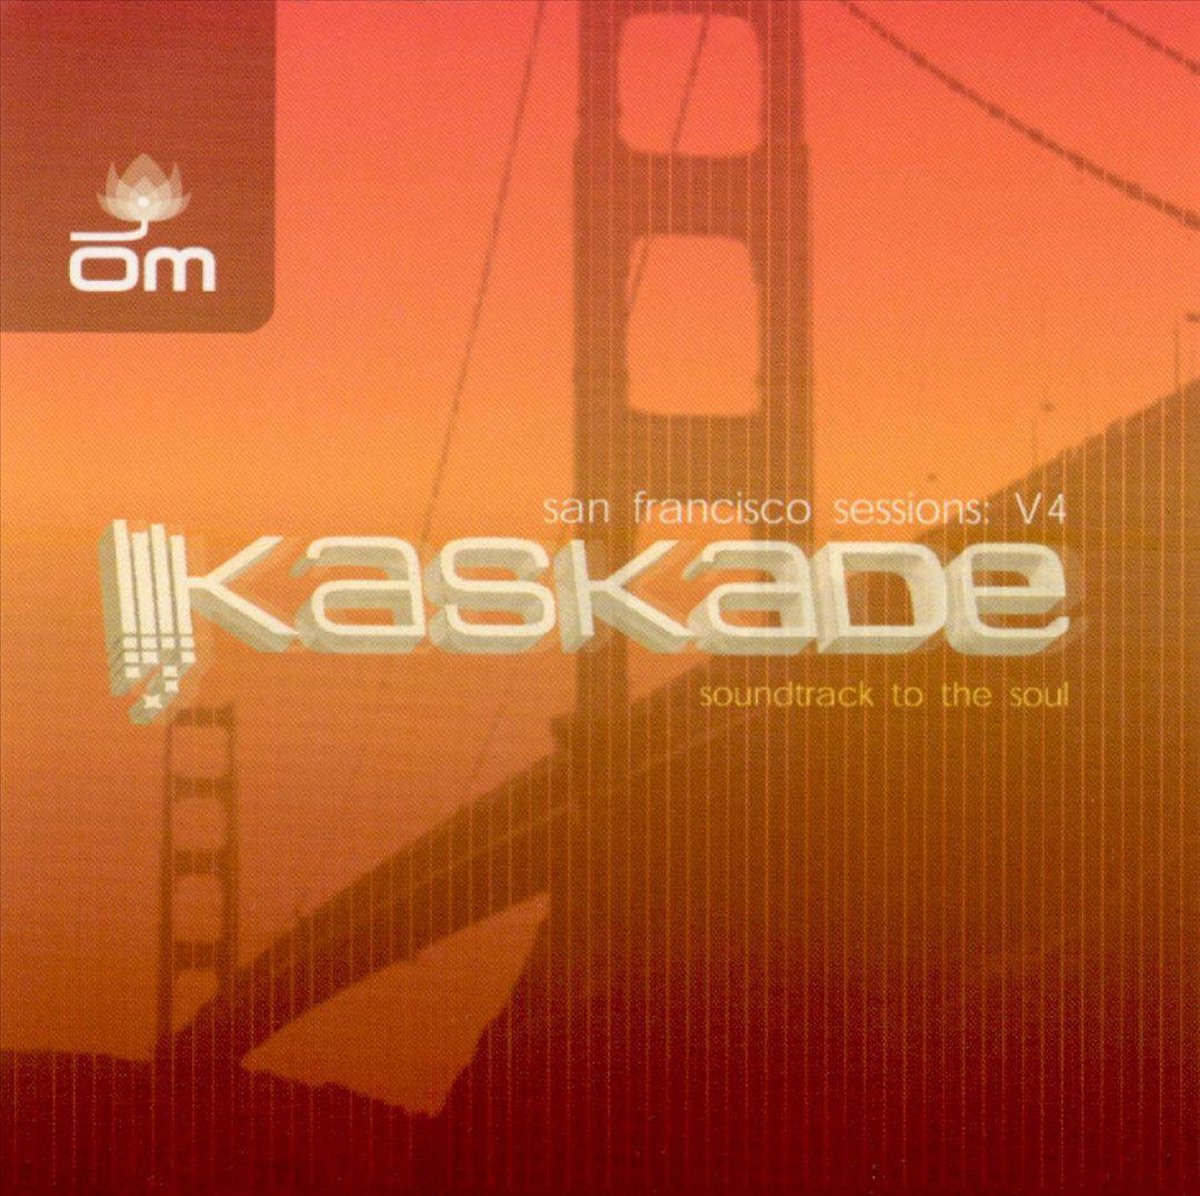 San Francisco Sessions: Soundtrack To The Soul - Kaskade